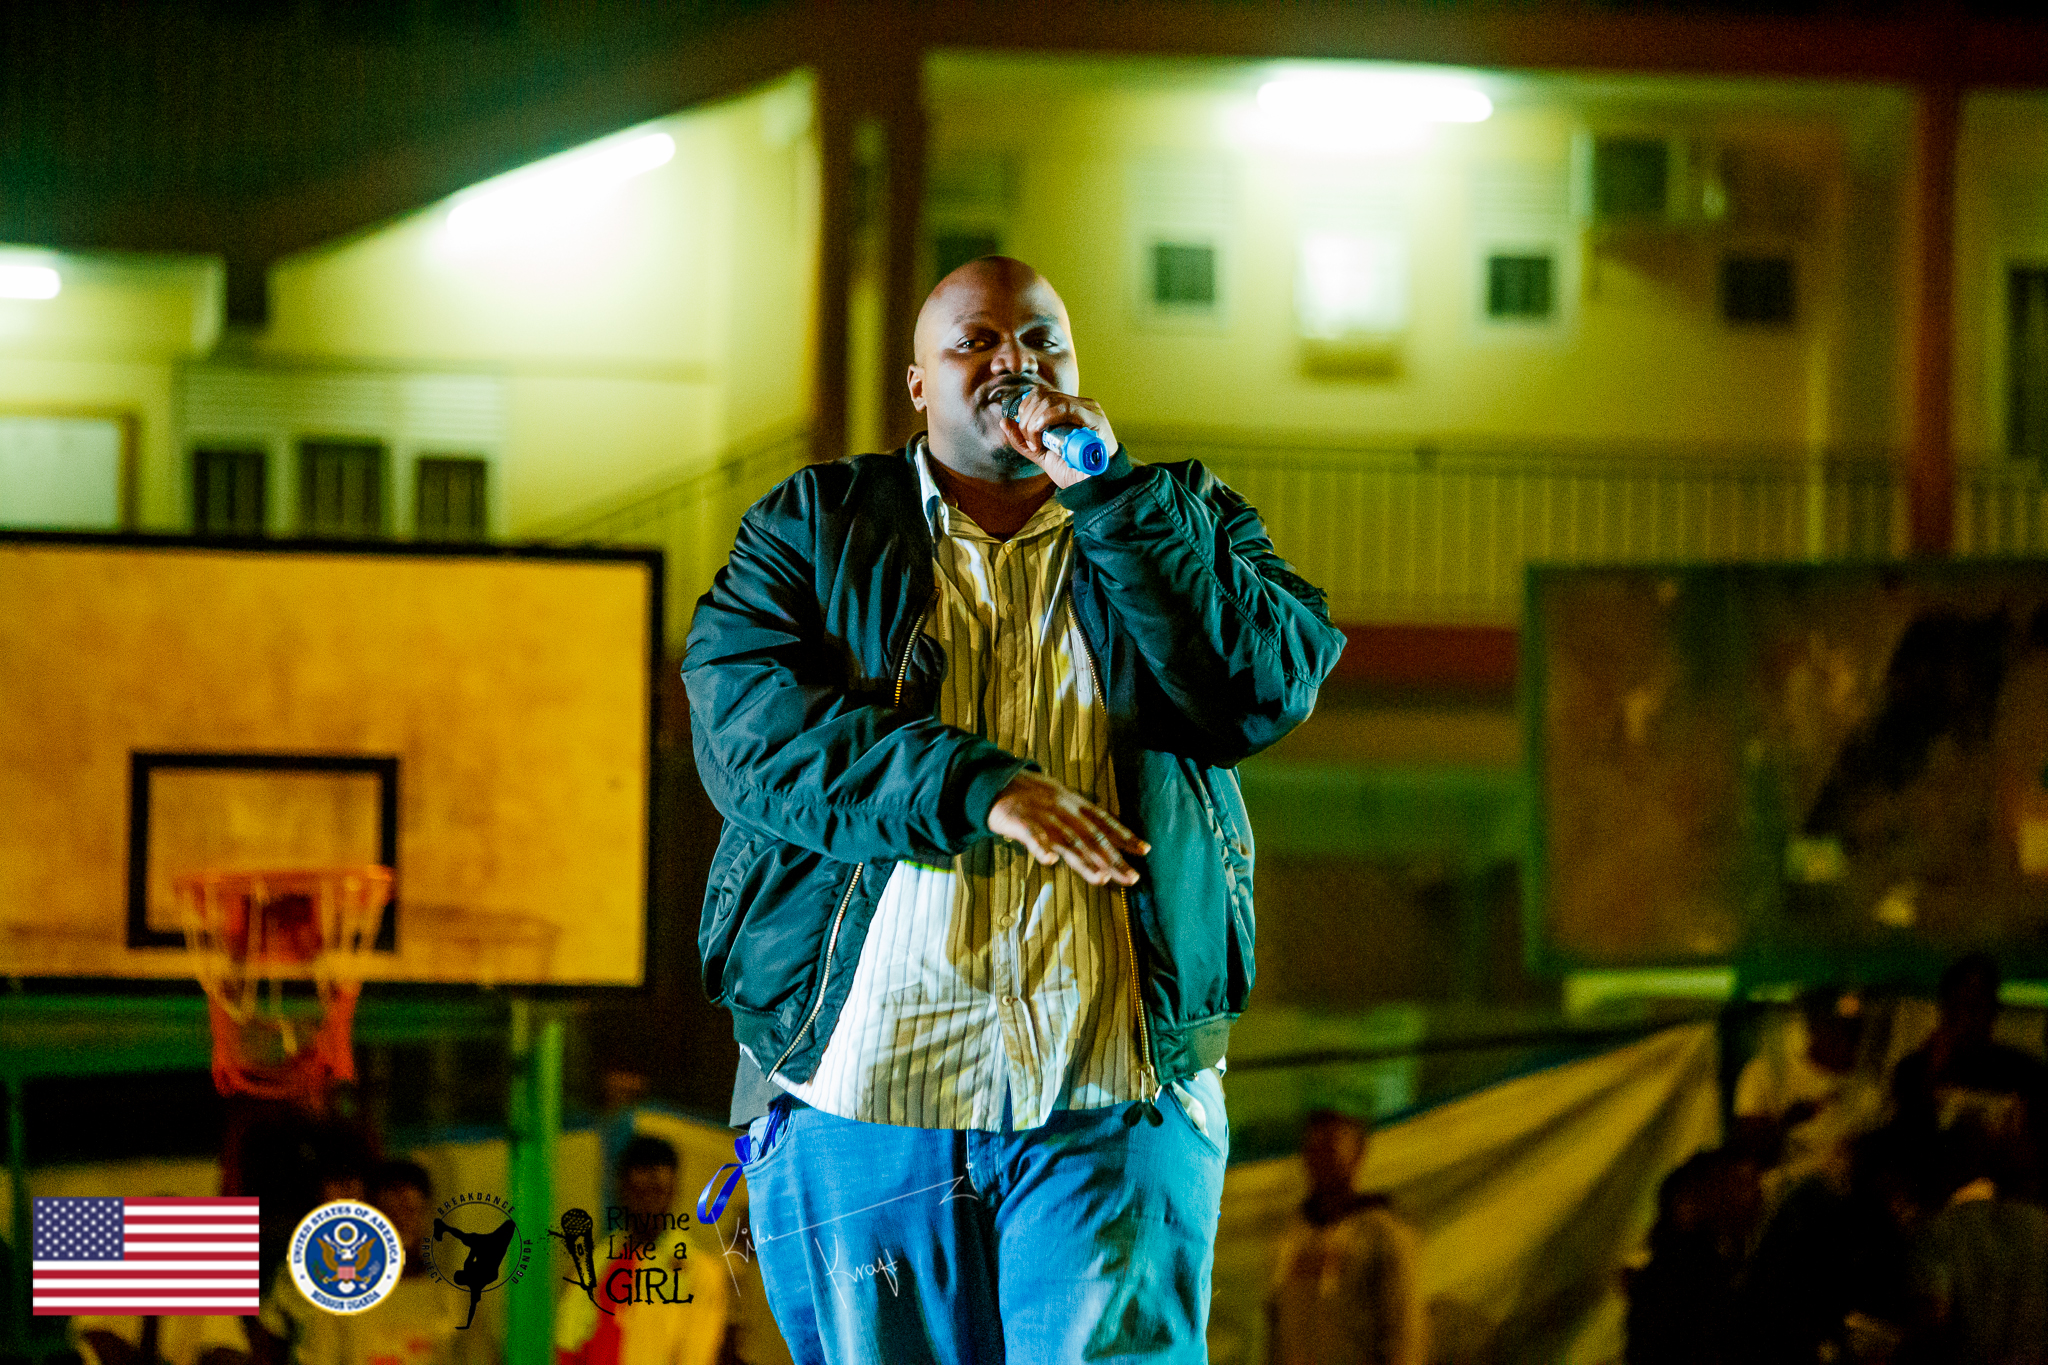 PHOTOS: What You Missed at the Hip Hop Explosive Concert